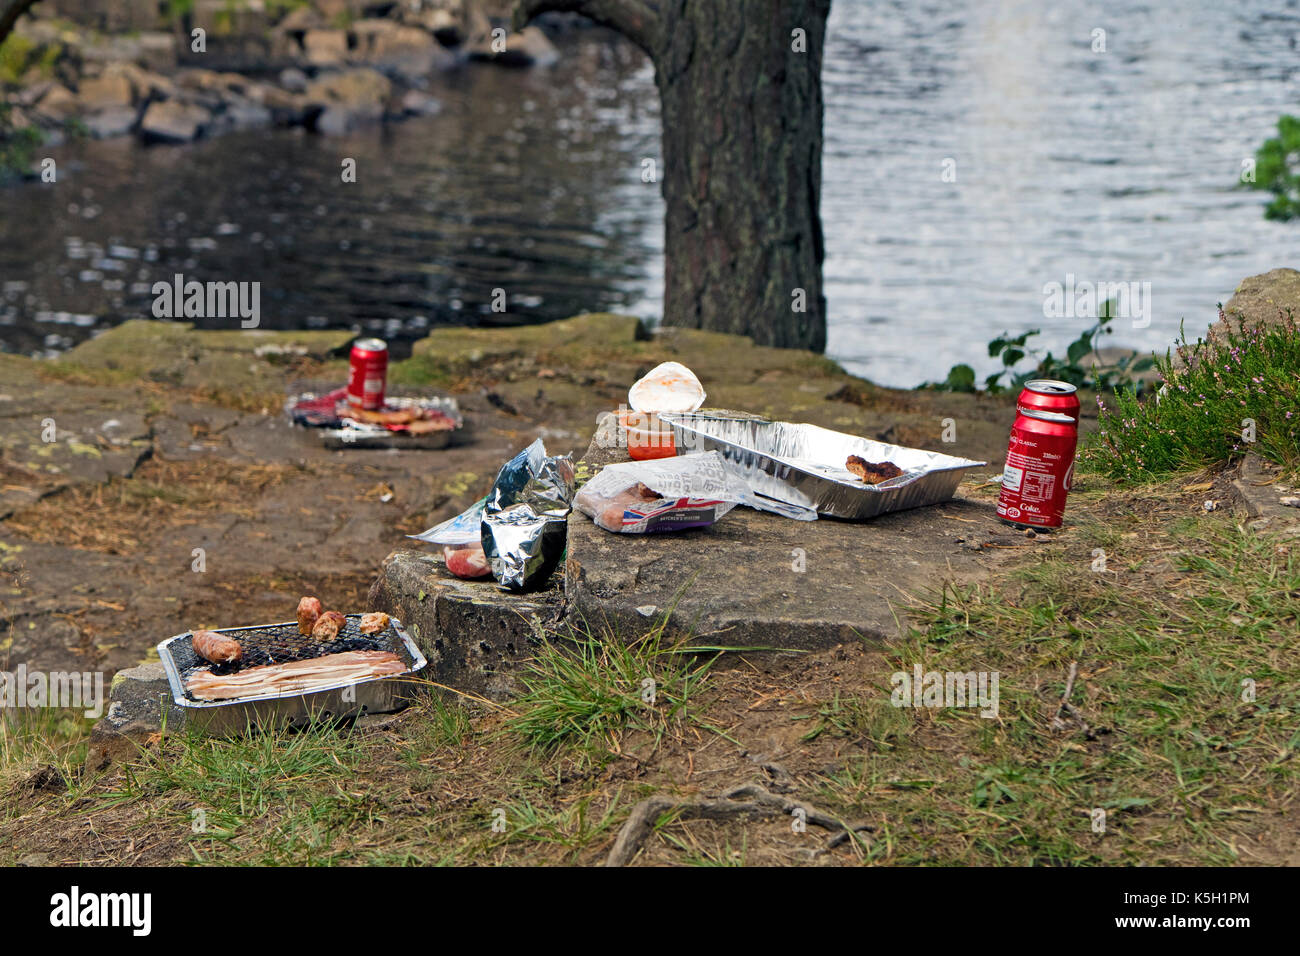 Discarded Disposable Barbeques, food leftovers and other Rubbish at a Riverside Beauty Spot, UK Stock Photo